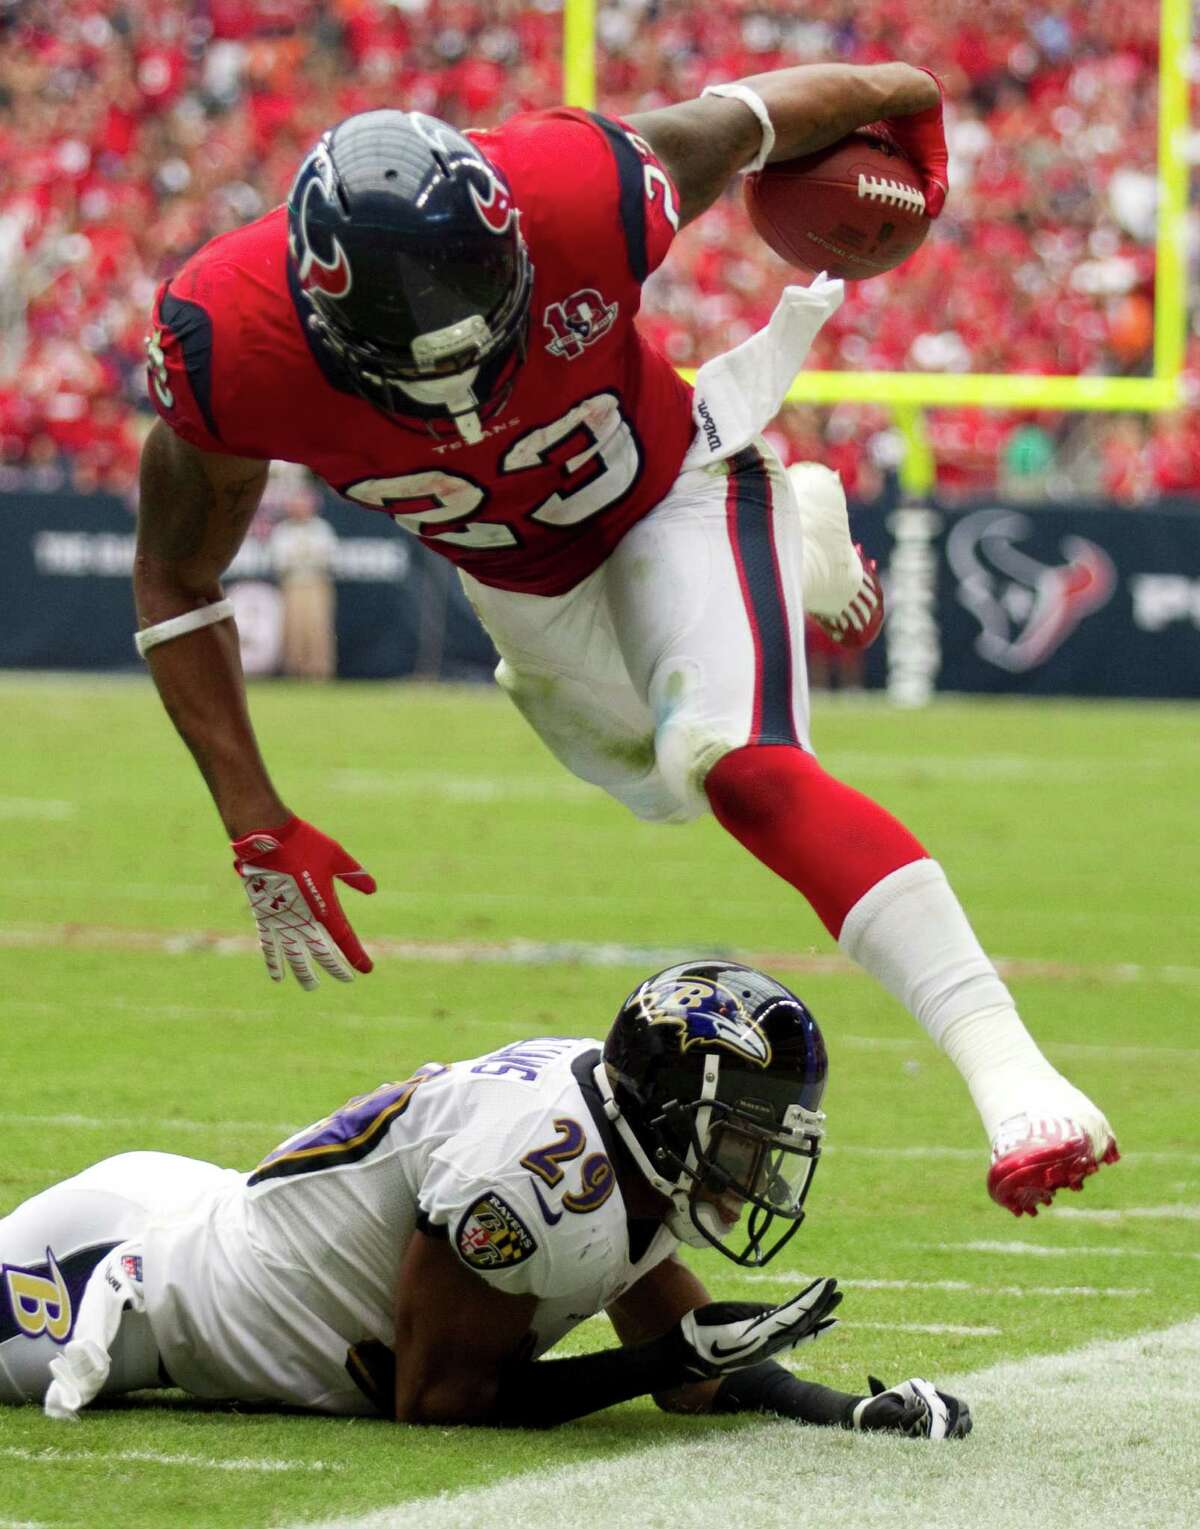 Texans running back Arian Foster eluded Ravens defenders like cornerback Cary Williams (29) all day on his way to 98 yards rushing in the Texans' win Sunday.